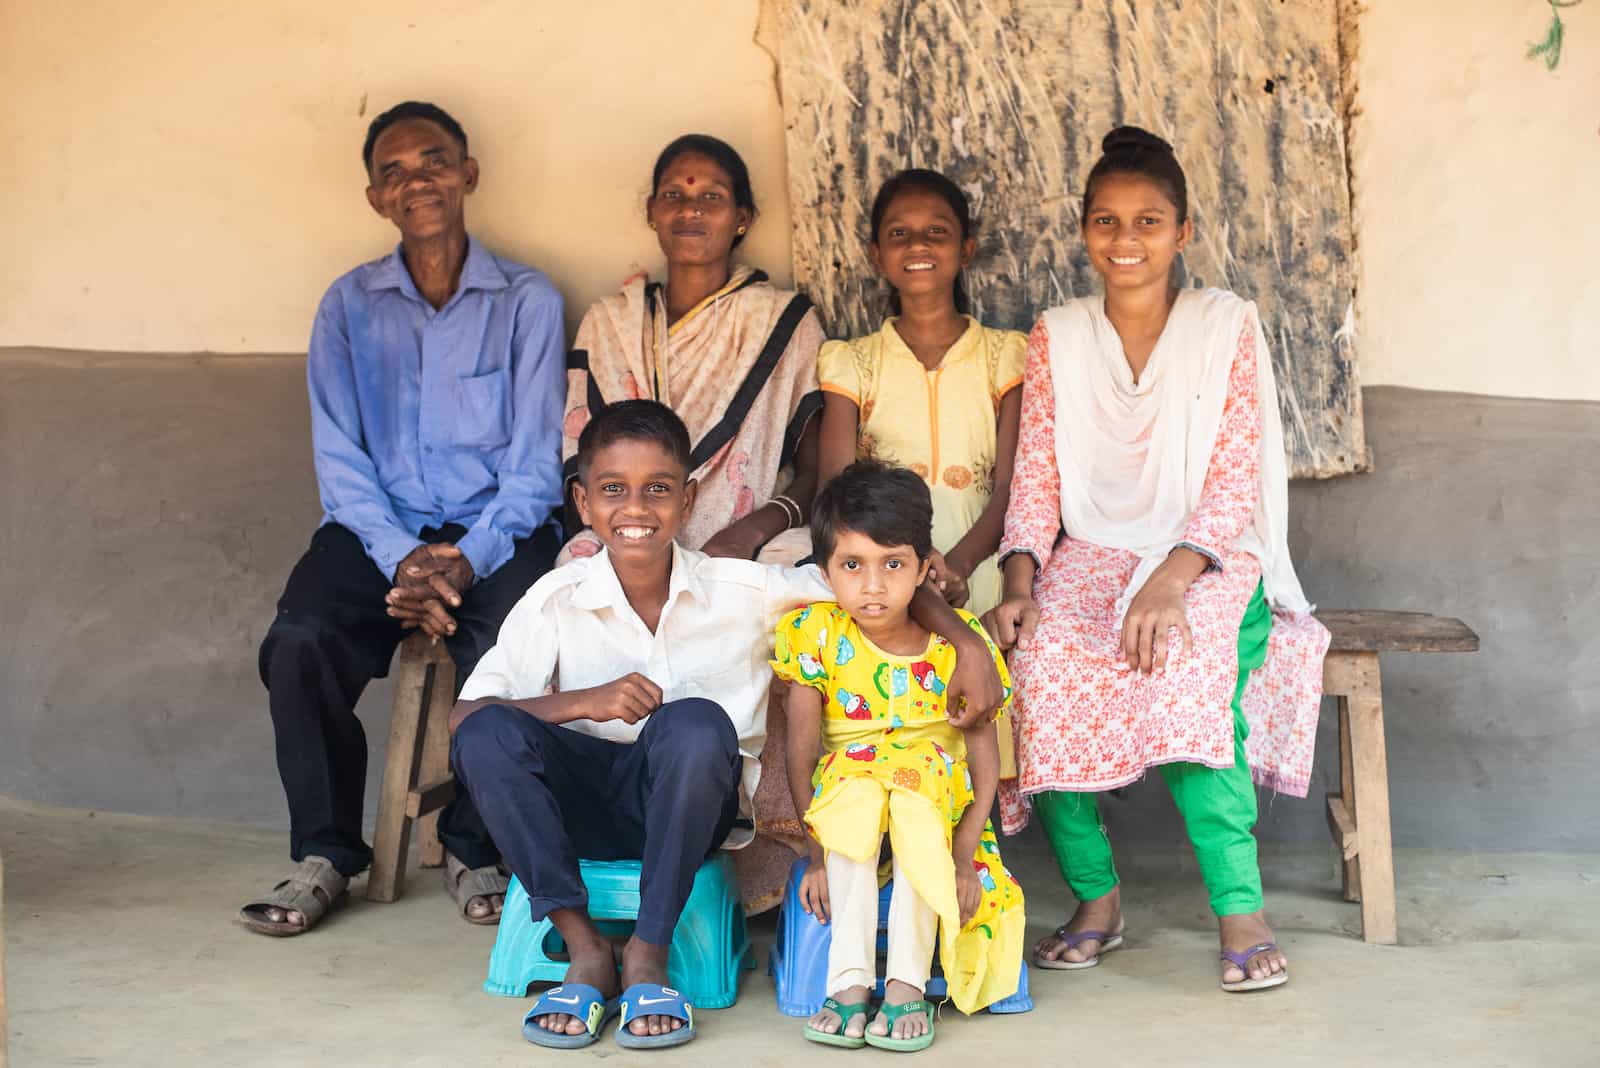 A family of six sits outside, smiling, including an older man in blue, a woman wearing a tan sari, a girl in a yellow dress, and another girl in a pink and green outfit. Below them are a young boy in a white shirt and blue pants and a young girl in a yellow dress. 